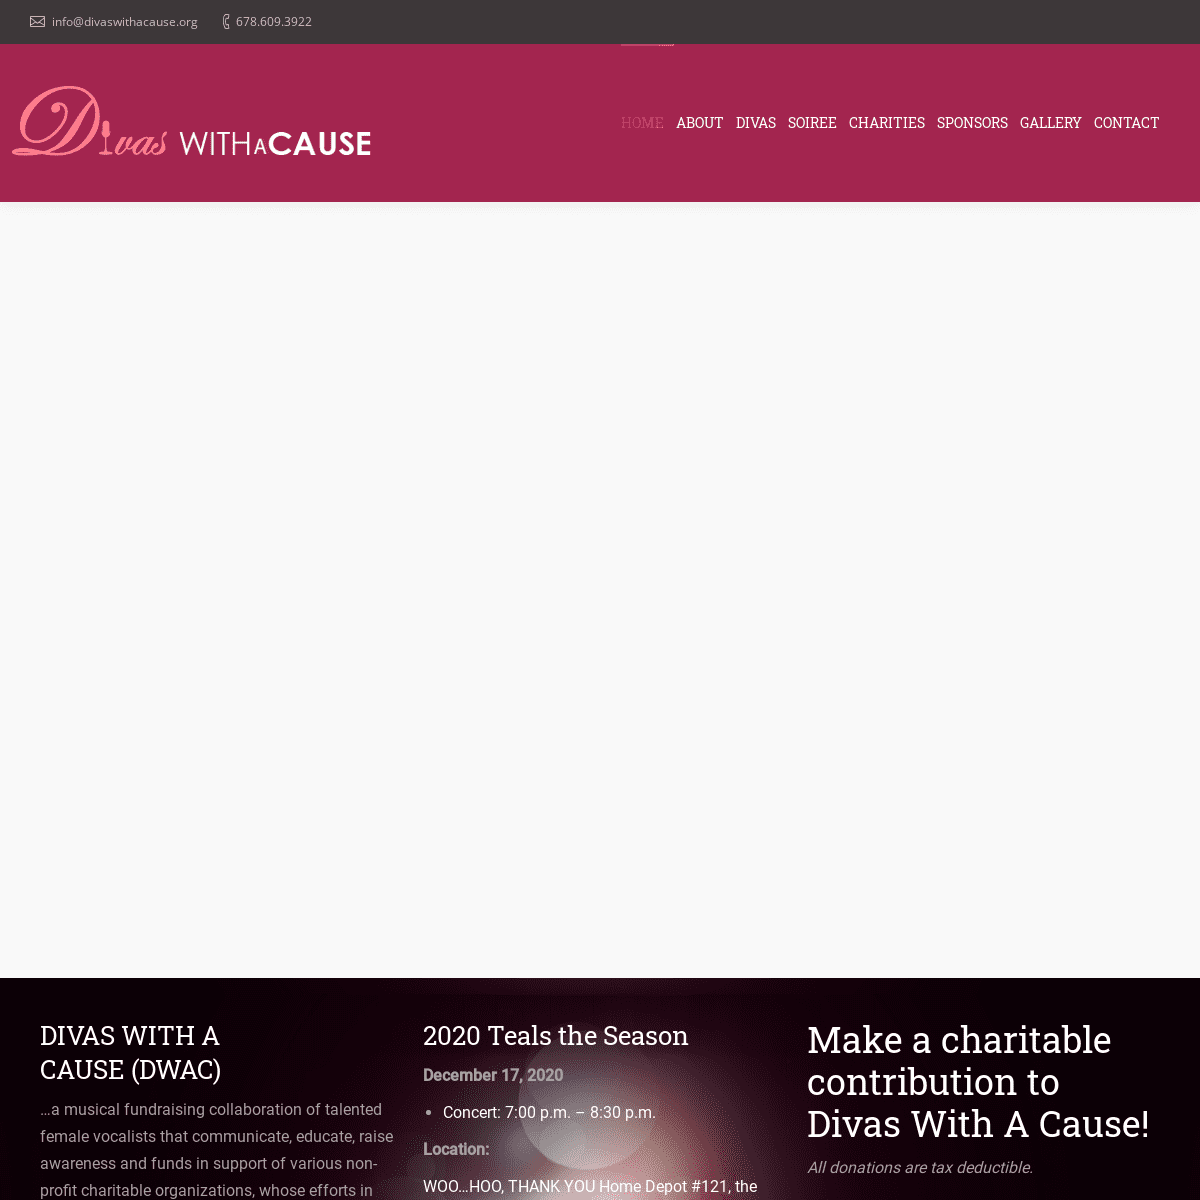 A complete backup of divaswithacause.org